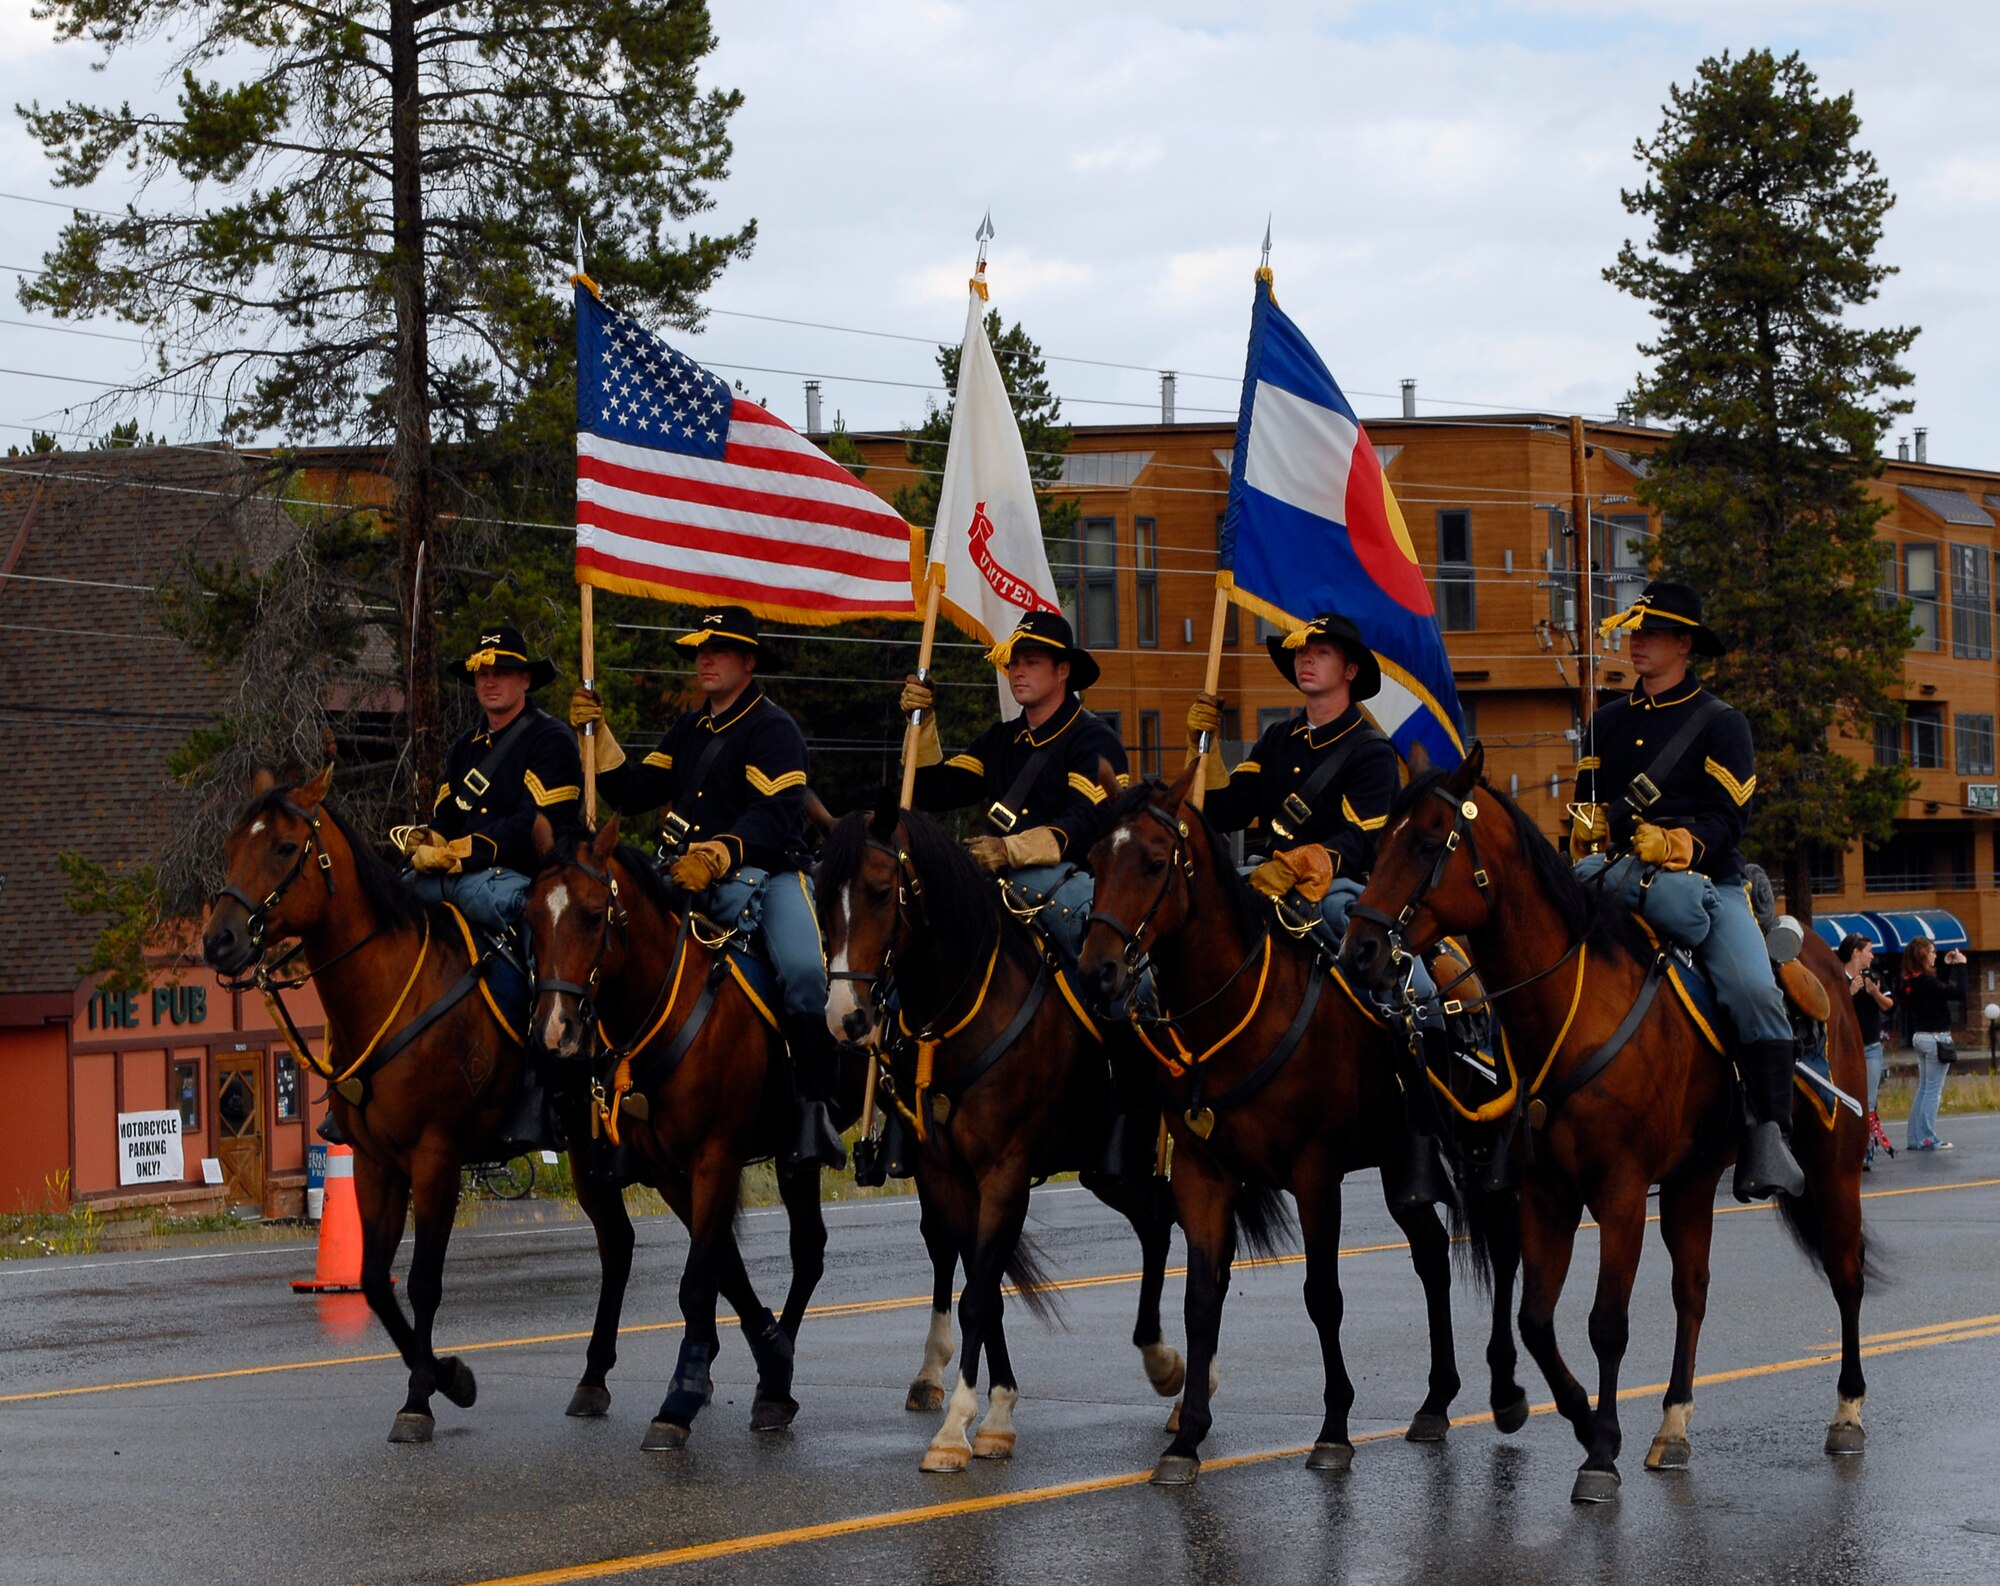 Soldiers from Fort Carson provide a mounted color guard for the Salute to American Veterans Rally and Festival parade in Winter Park, Colo., Aug. 15. (U.S. Air Force photo by Senior Airman Stephen Musal)